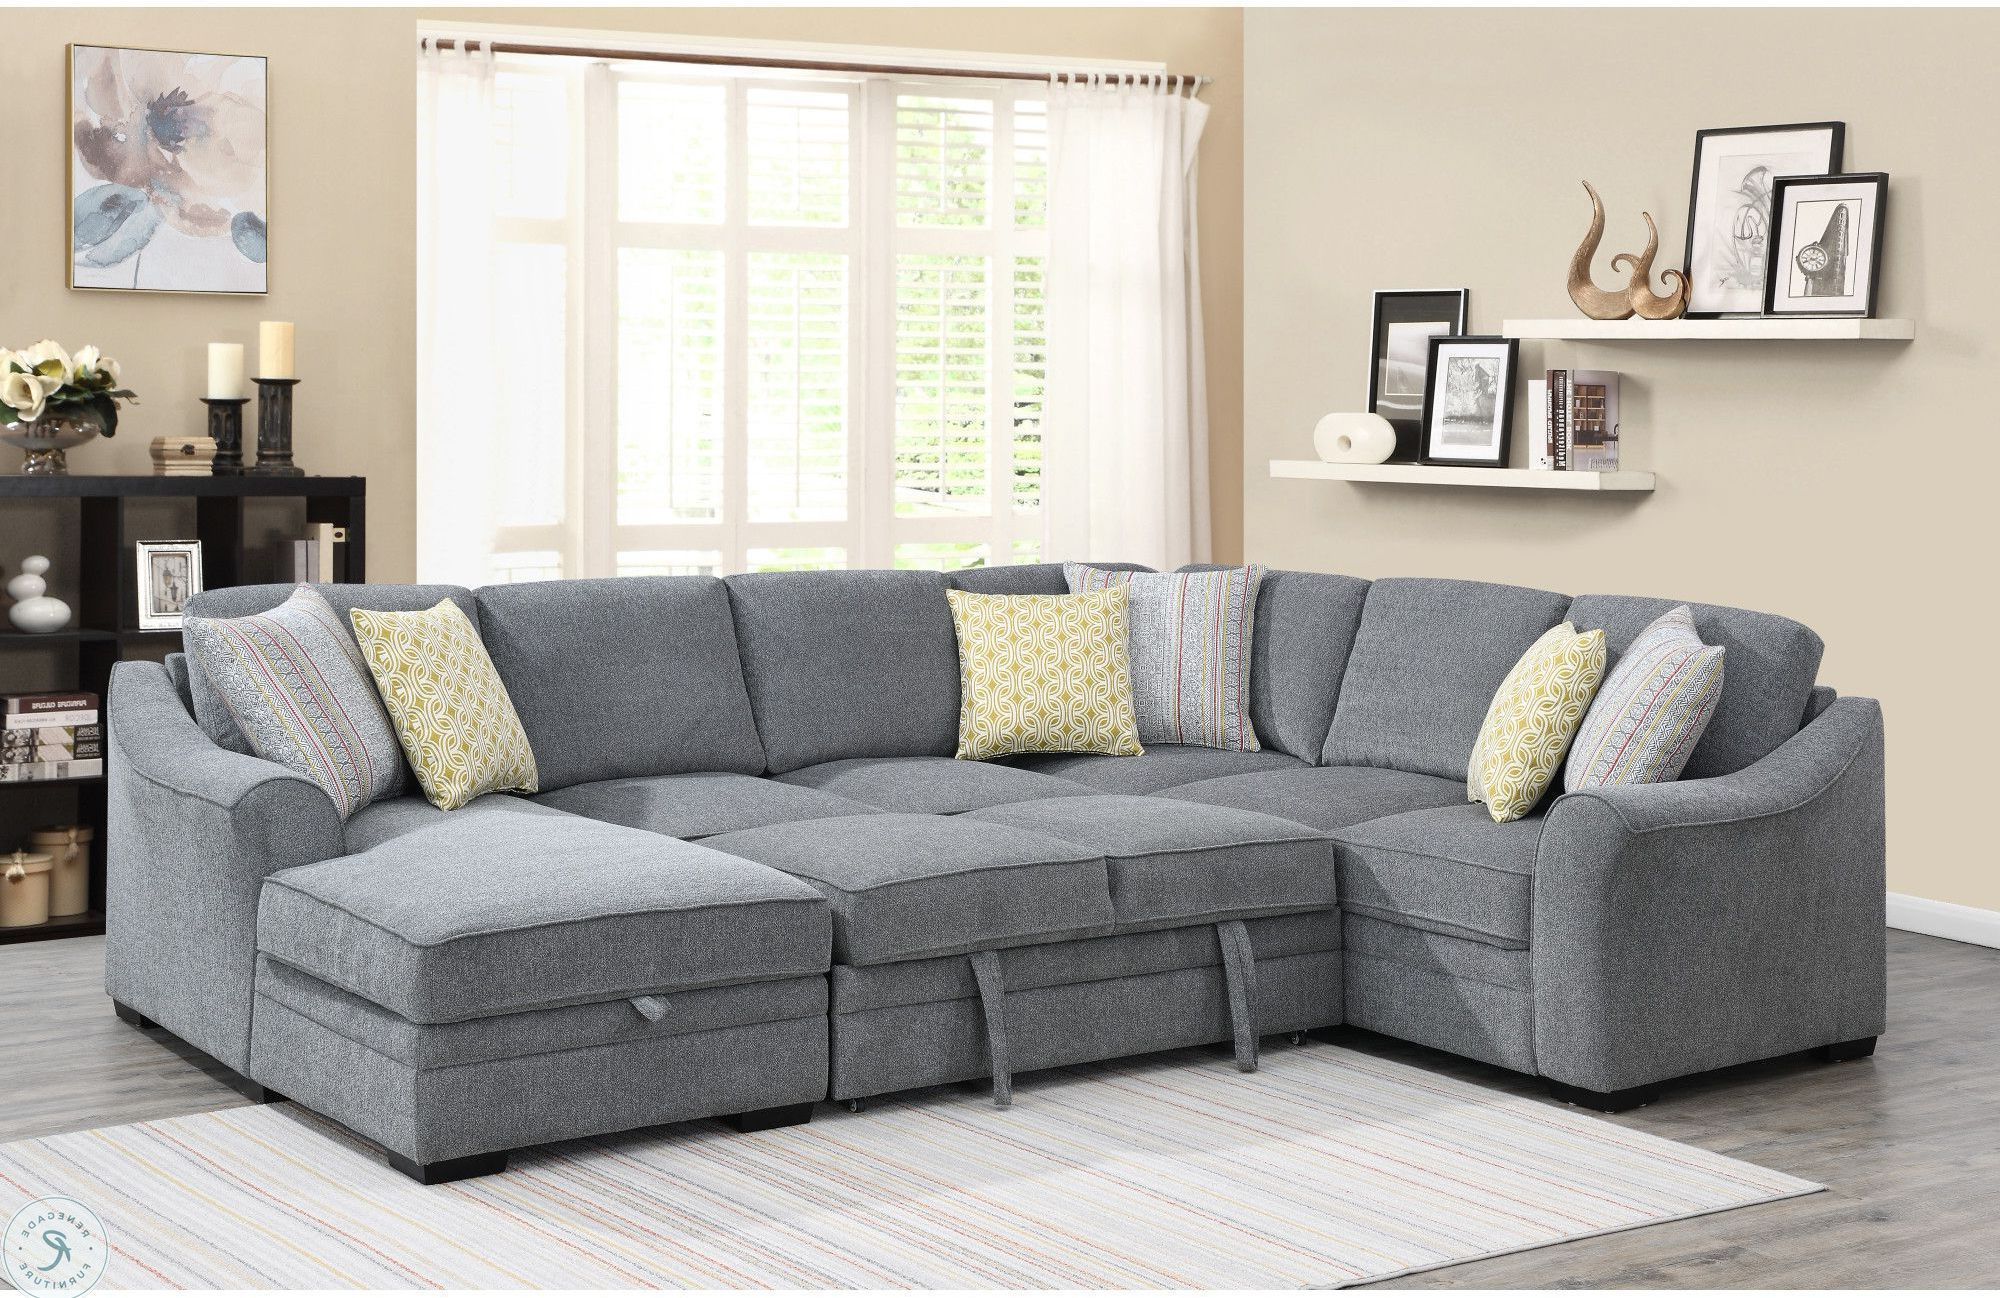 Accrington Earth Laf Sectional | Sectional Sleeper Sofa, Furniture With Left Or Right Facing Sleeper Sectionals (View 3 of 20)